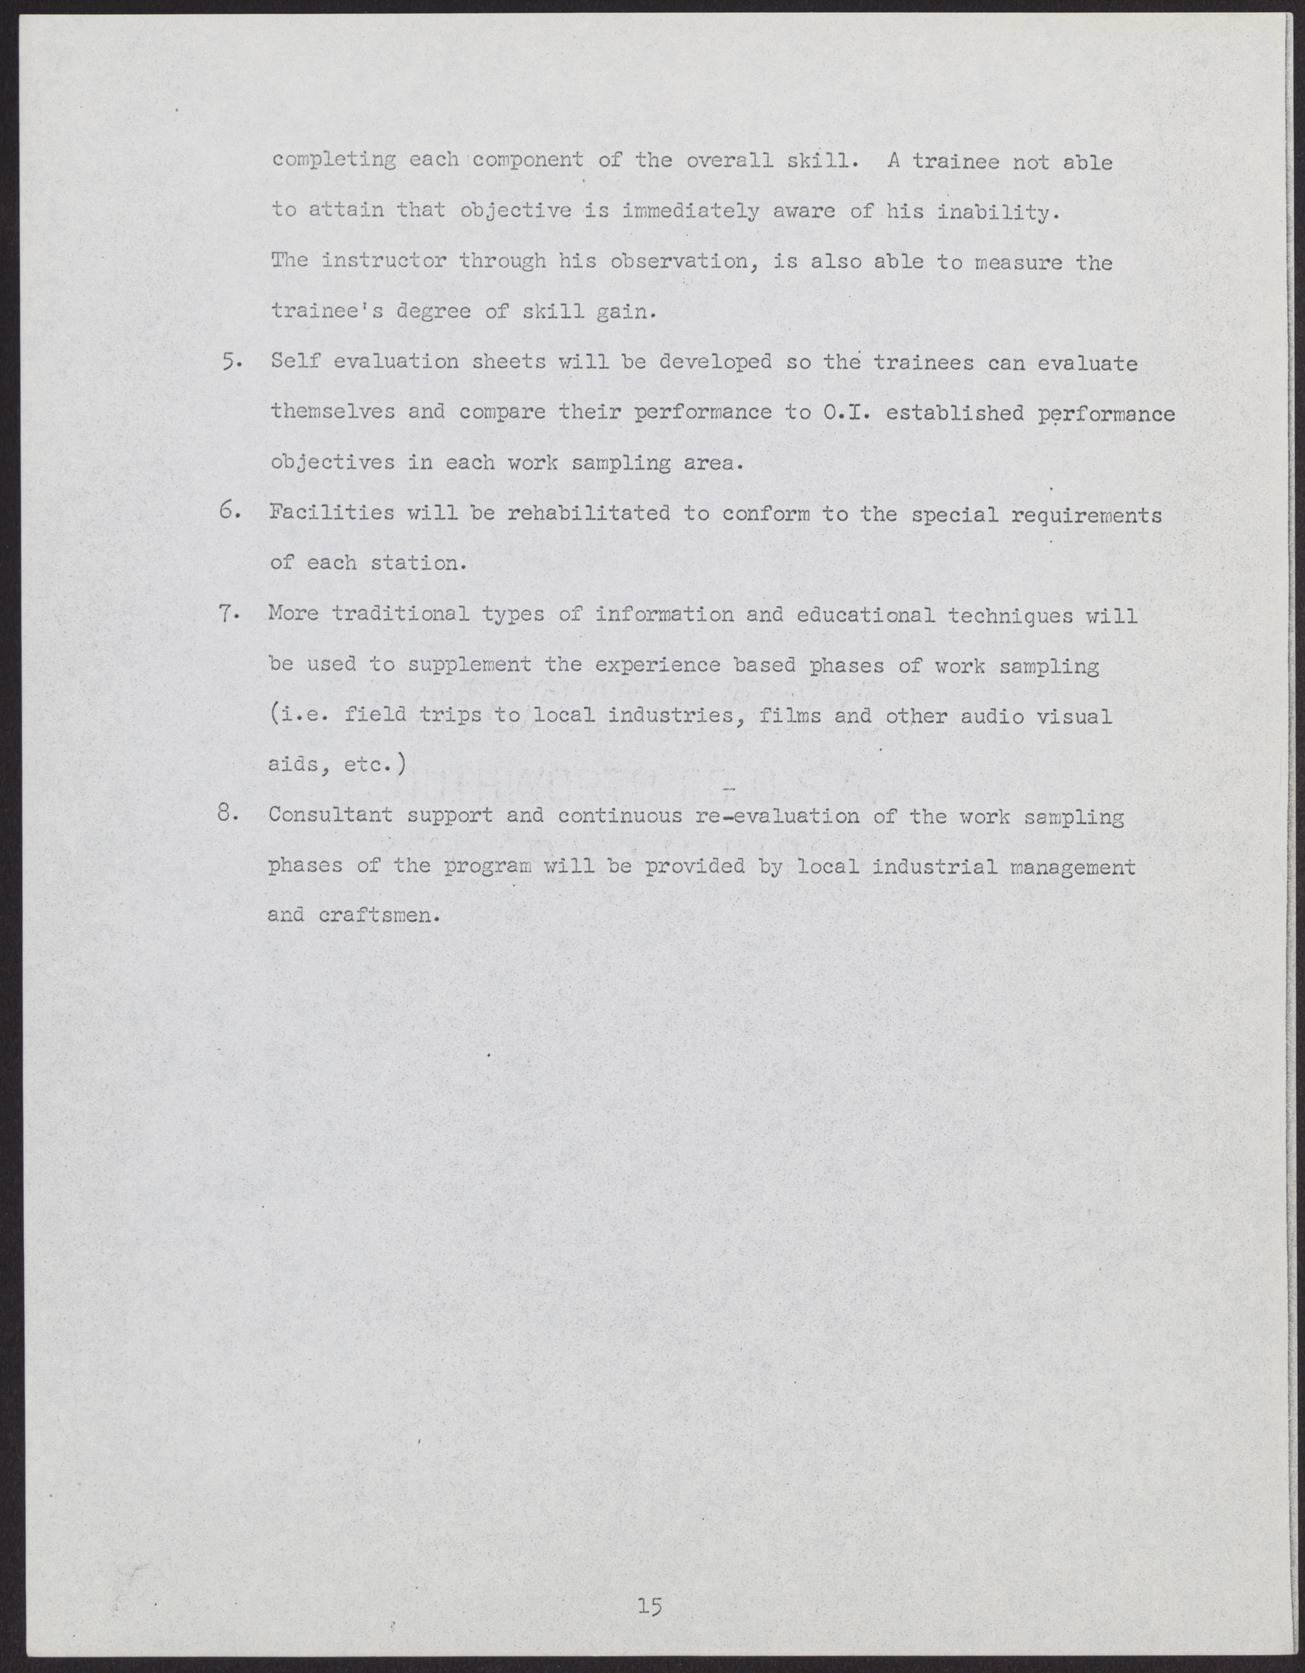 Proposal to the Clark County, Nevada Concentrated Employment Program (21 pages, missing some pages/sections listed in its table of contents), July 2, 1968, page 19